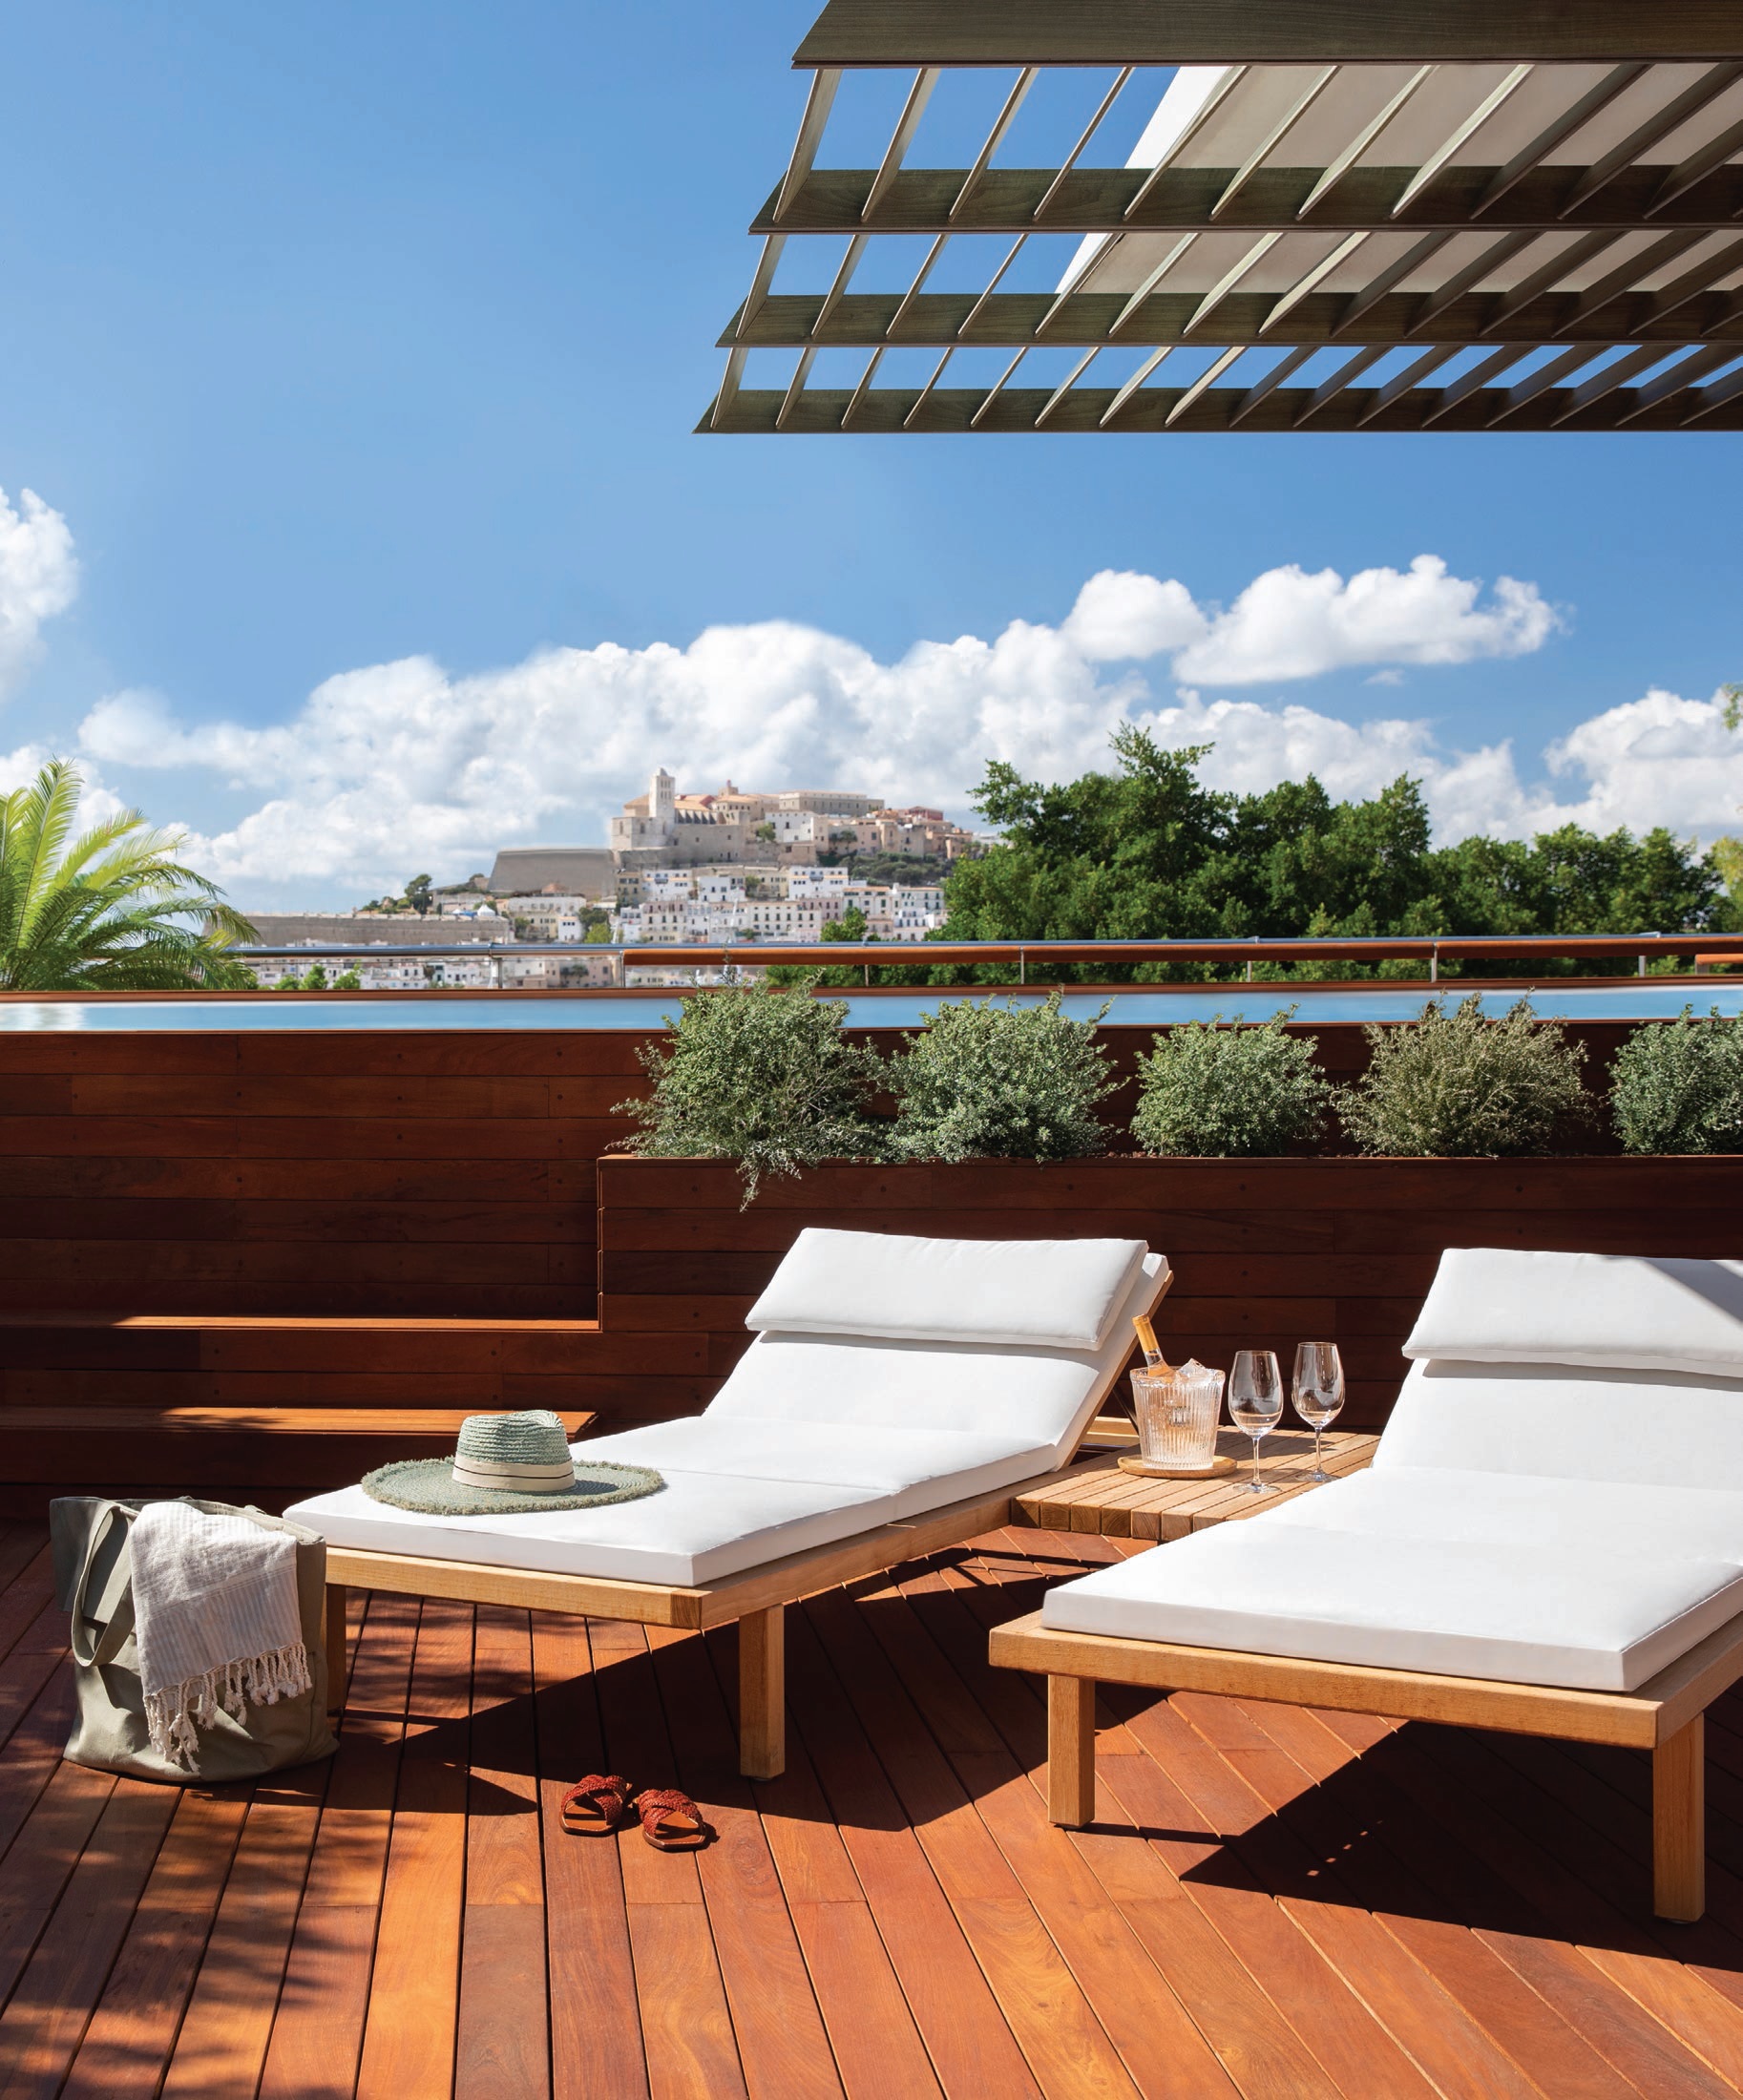 Ibiza Gran Hotel’s Superior Pool Suite includes its own private terrace and infinity-edge pool. PHOTO COURTESY OF IBIZA GRAN HOTEL